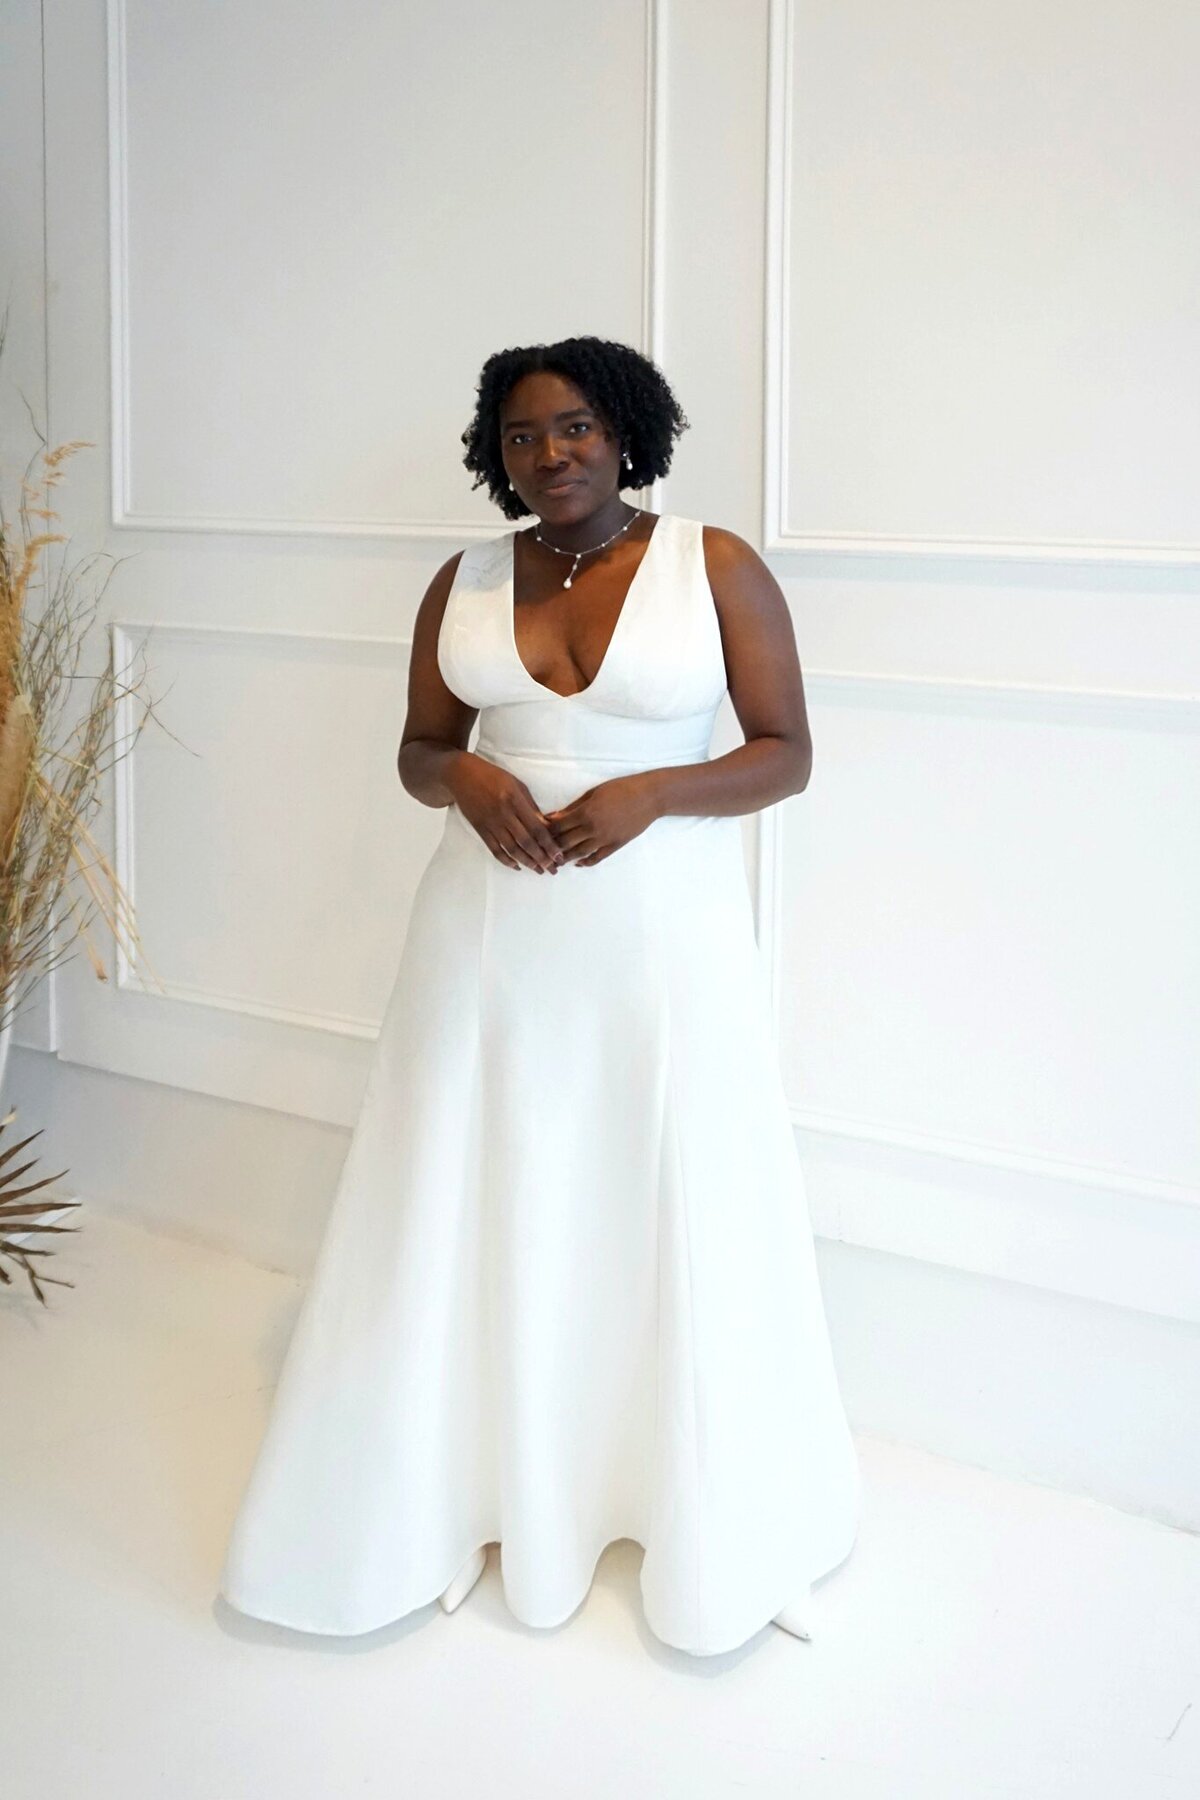 Black model in a floral crepe wedding gown with a modified a-line silhouette and a v-neck bodice.